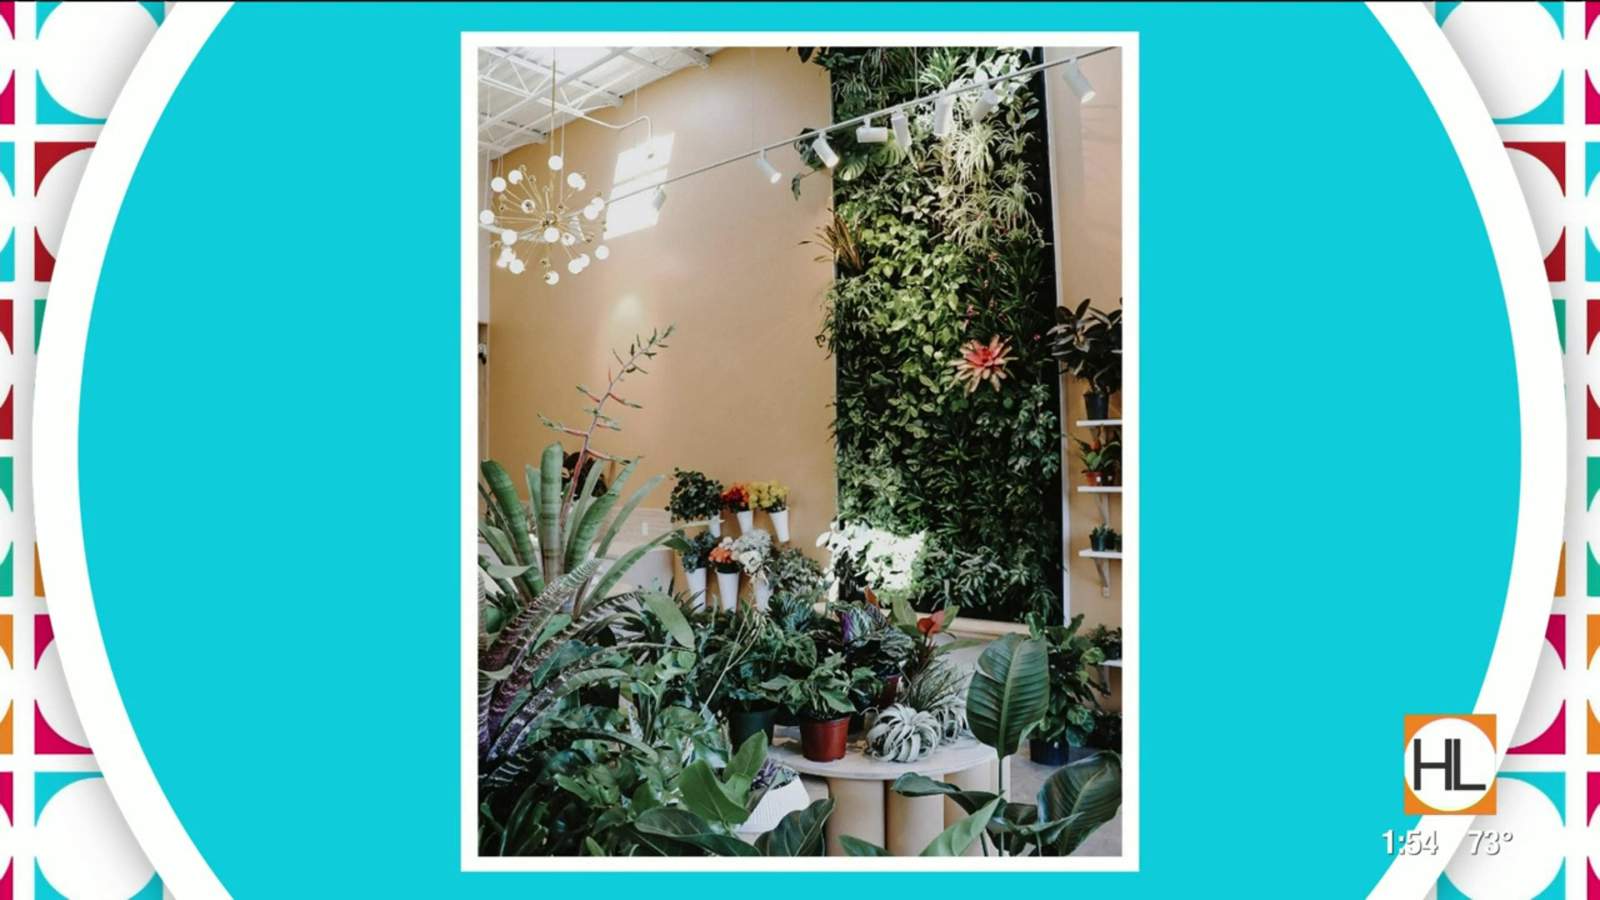 How you can receive 25% off any air plant at this Houston plant and floral design shop